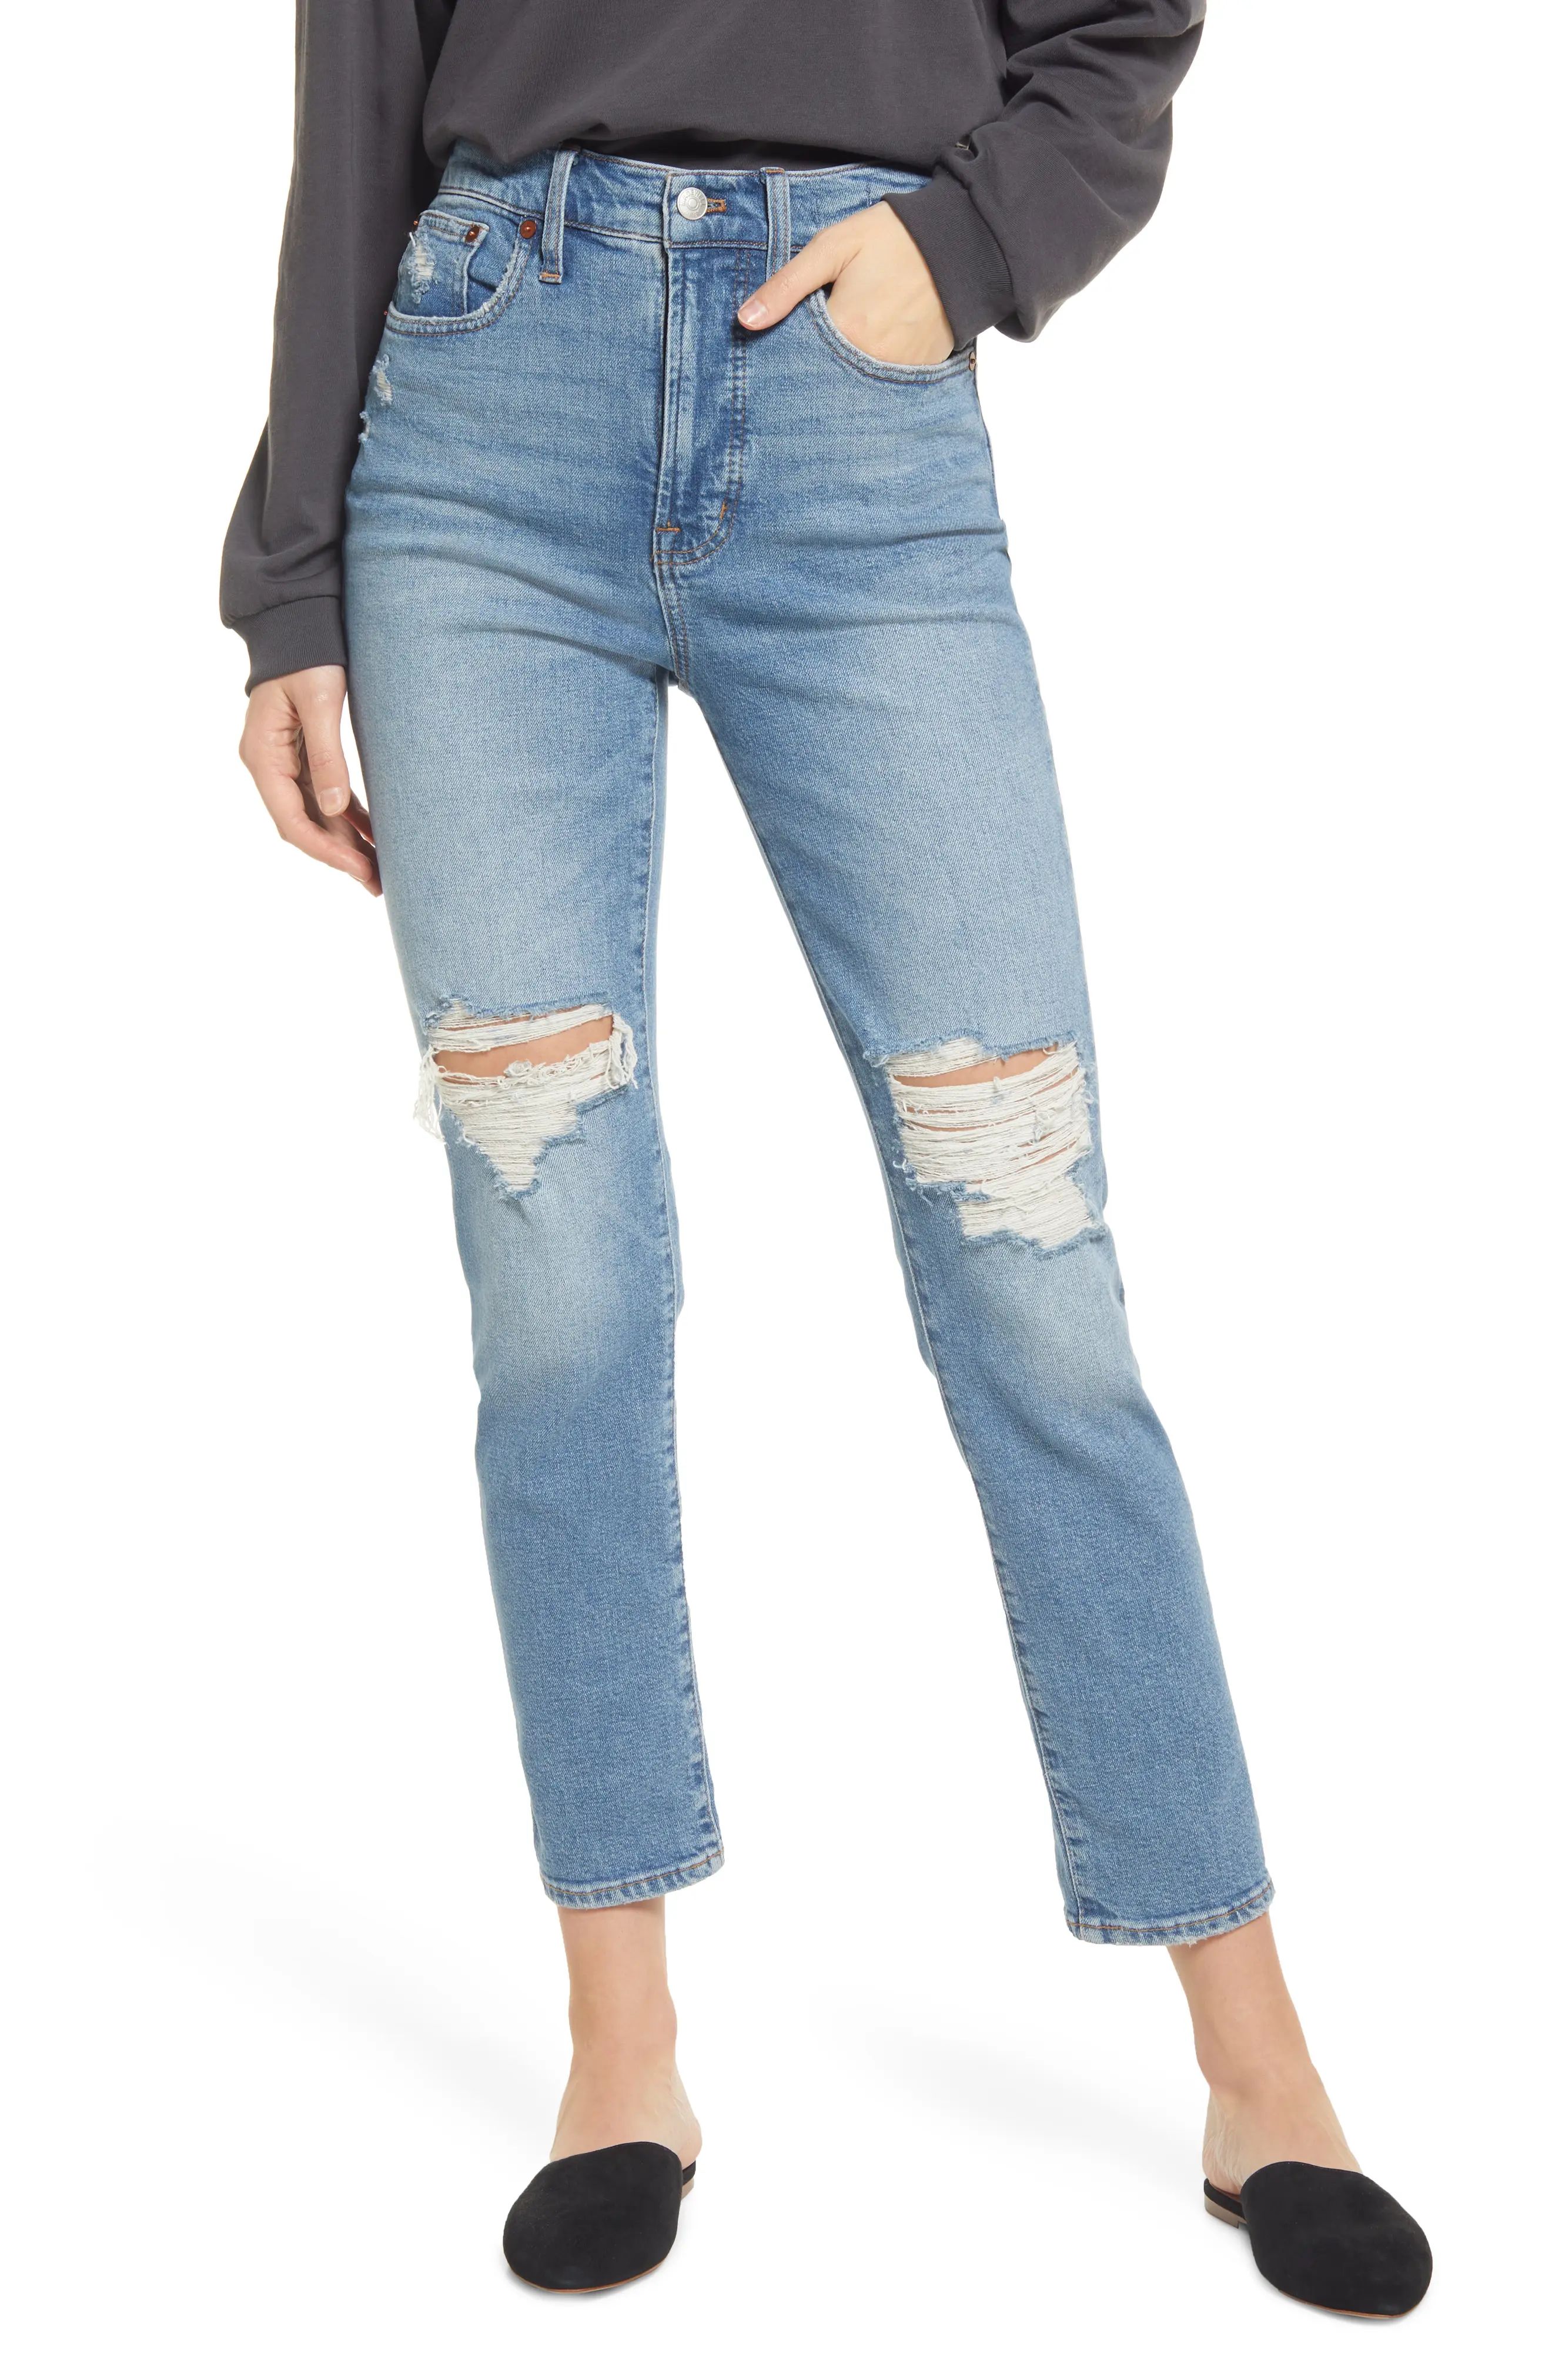 Madewell The Perfect High Waist Ripped Jeans in Denman Wash at Nordstrom, Size 24 | Nordstrom